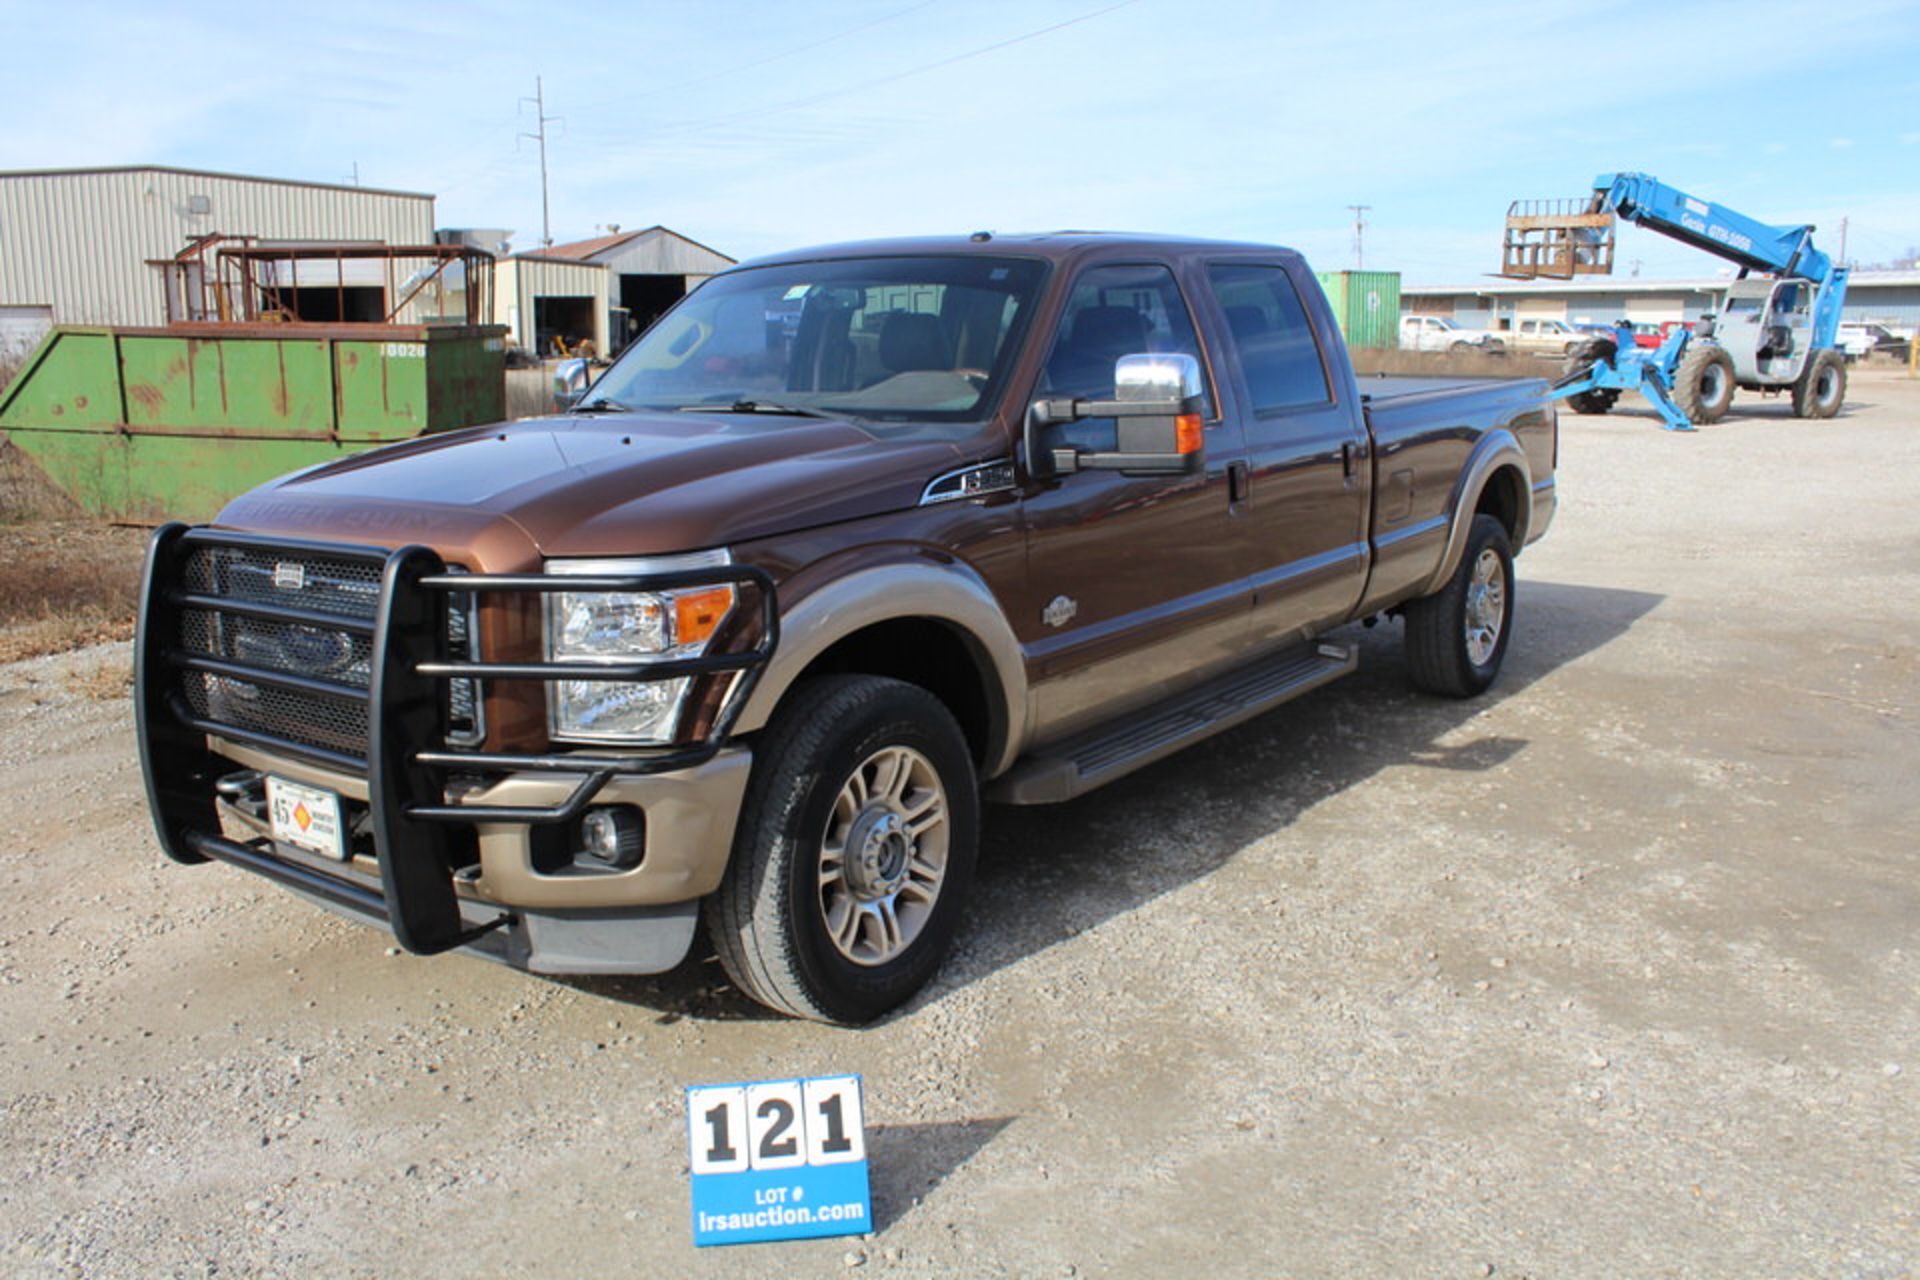 2010 FORD 350 KINGRANCH LONG BED TRUCK, SINGLE REARWHEEL, APPROX 110,000 MILES, SUNROOF, NAVIGATION